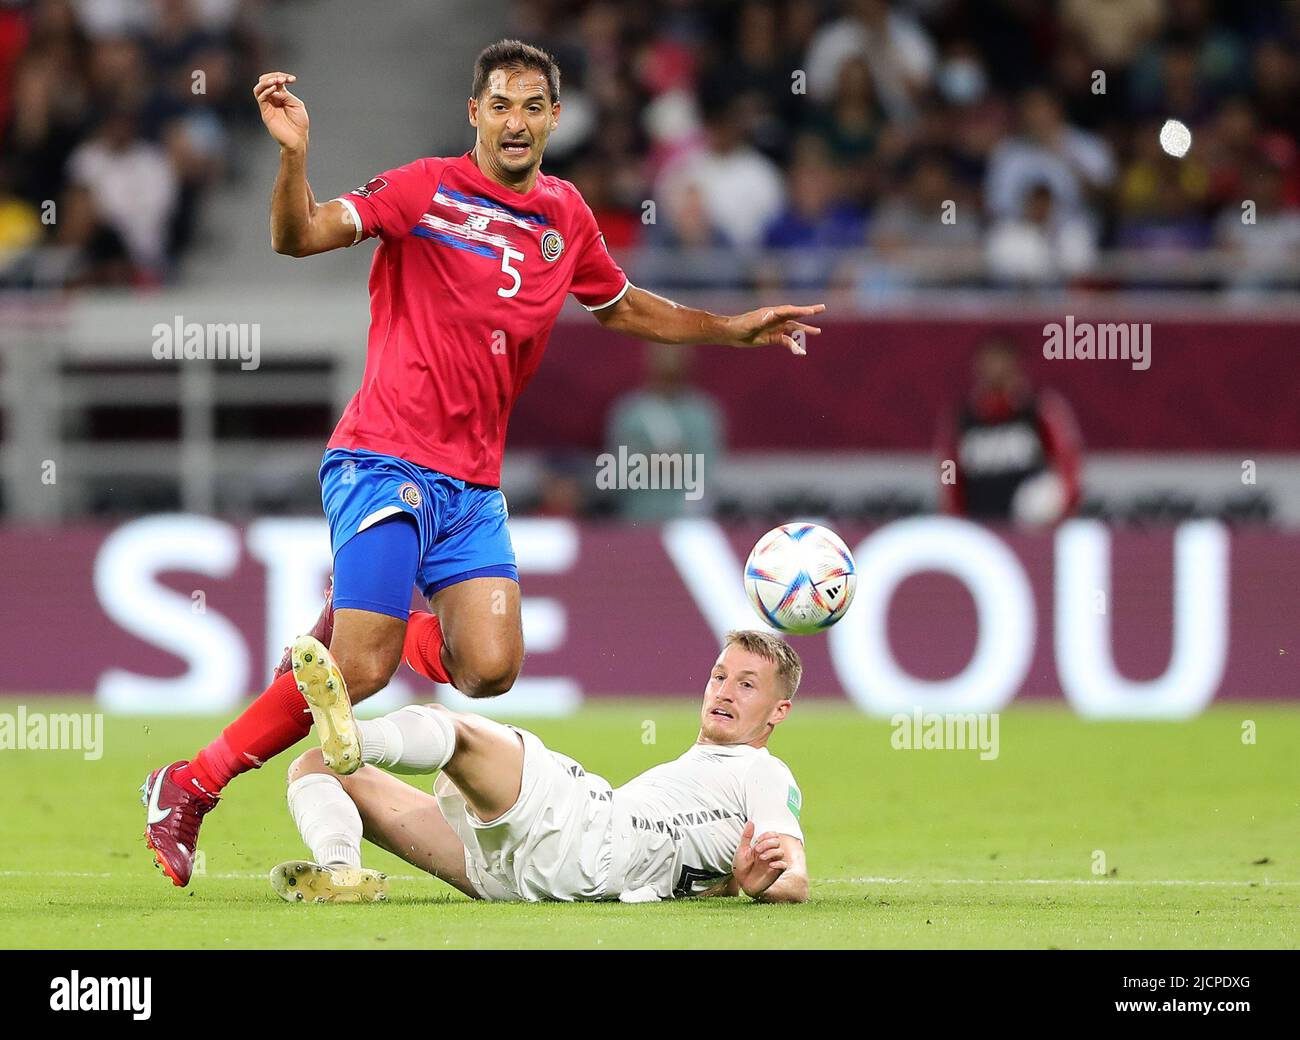 Doha, Qatar. 14th June, 2022. Celso Borges (L) of Costa Rica breaks through during the FIFA World Cup 2022 intercontinental play-offs match between Costa Rica and New Zealand at the Ahmed bin Ali Stadium, Doha, Qatar, June 14, 2022. Credit: Wang Dongzhen/Xinhua/Alamy Live News Stock Photo